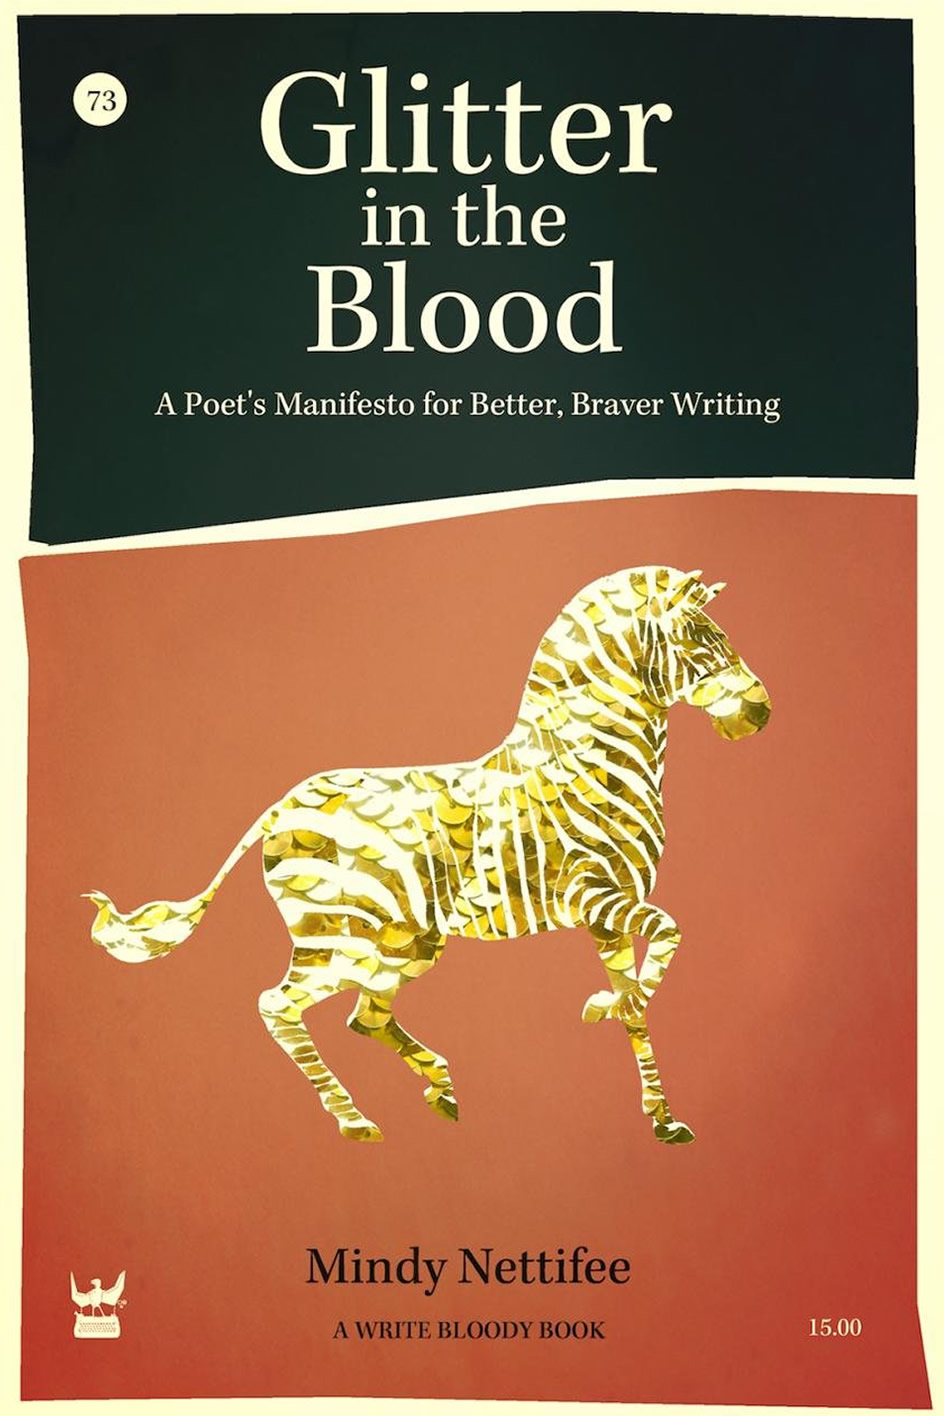 cover art for how-to book on writing poetry Glitter in the Blood